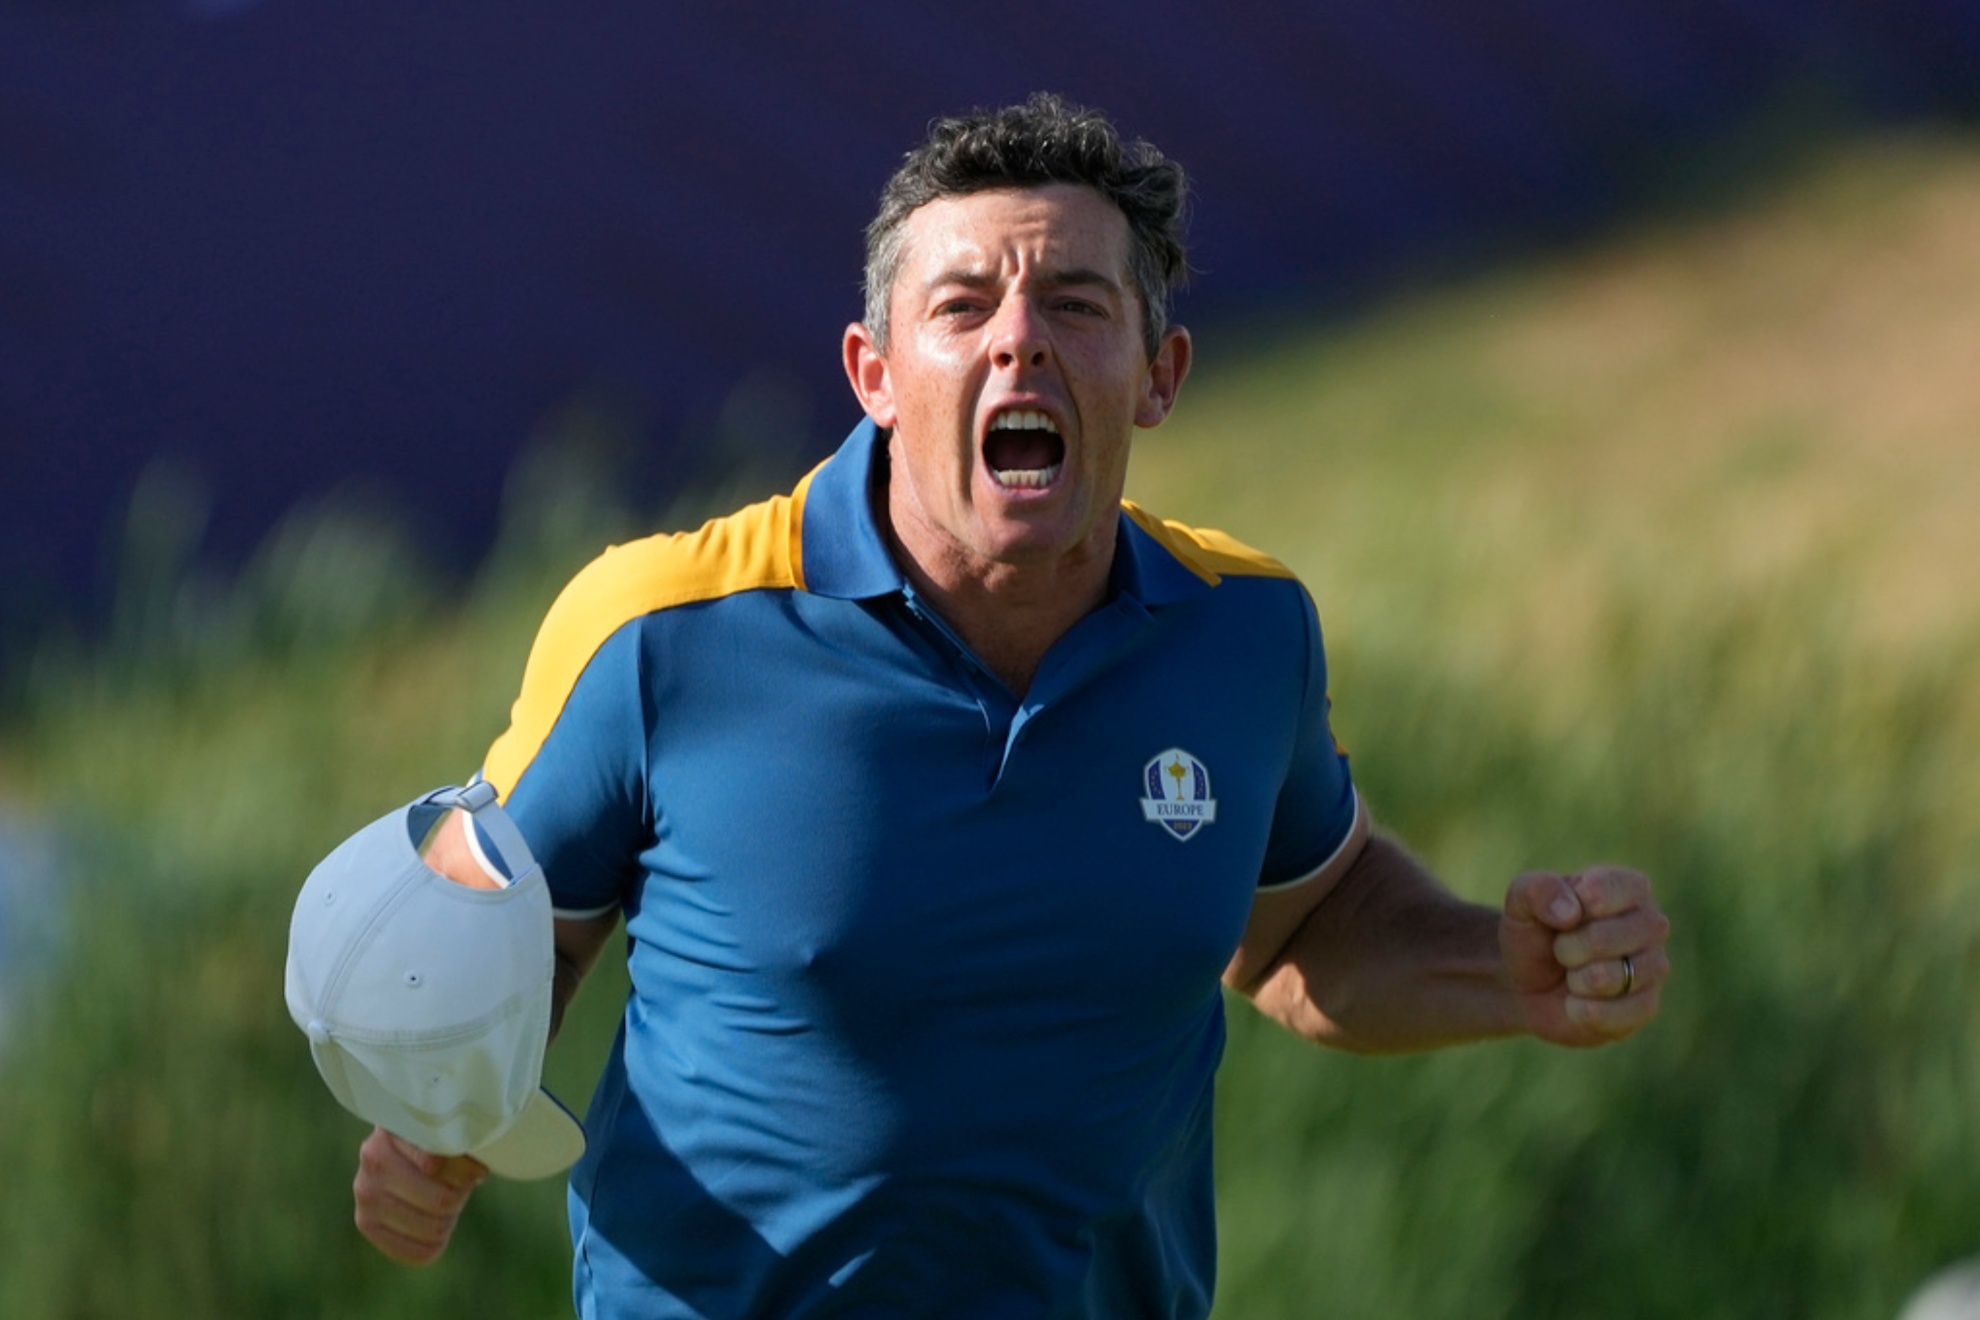 Rory McIlroy at the 2023 Ryder Cup in Italy.